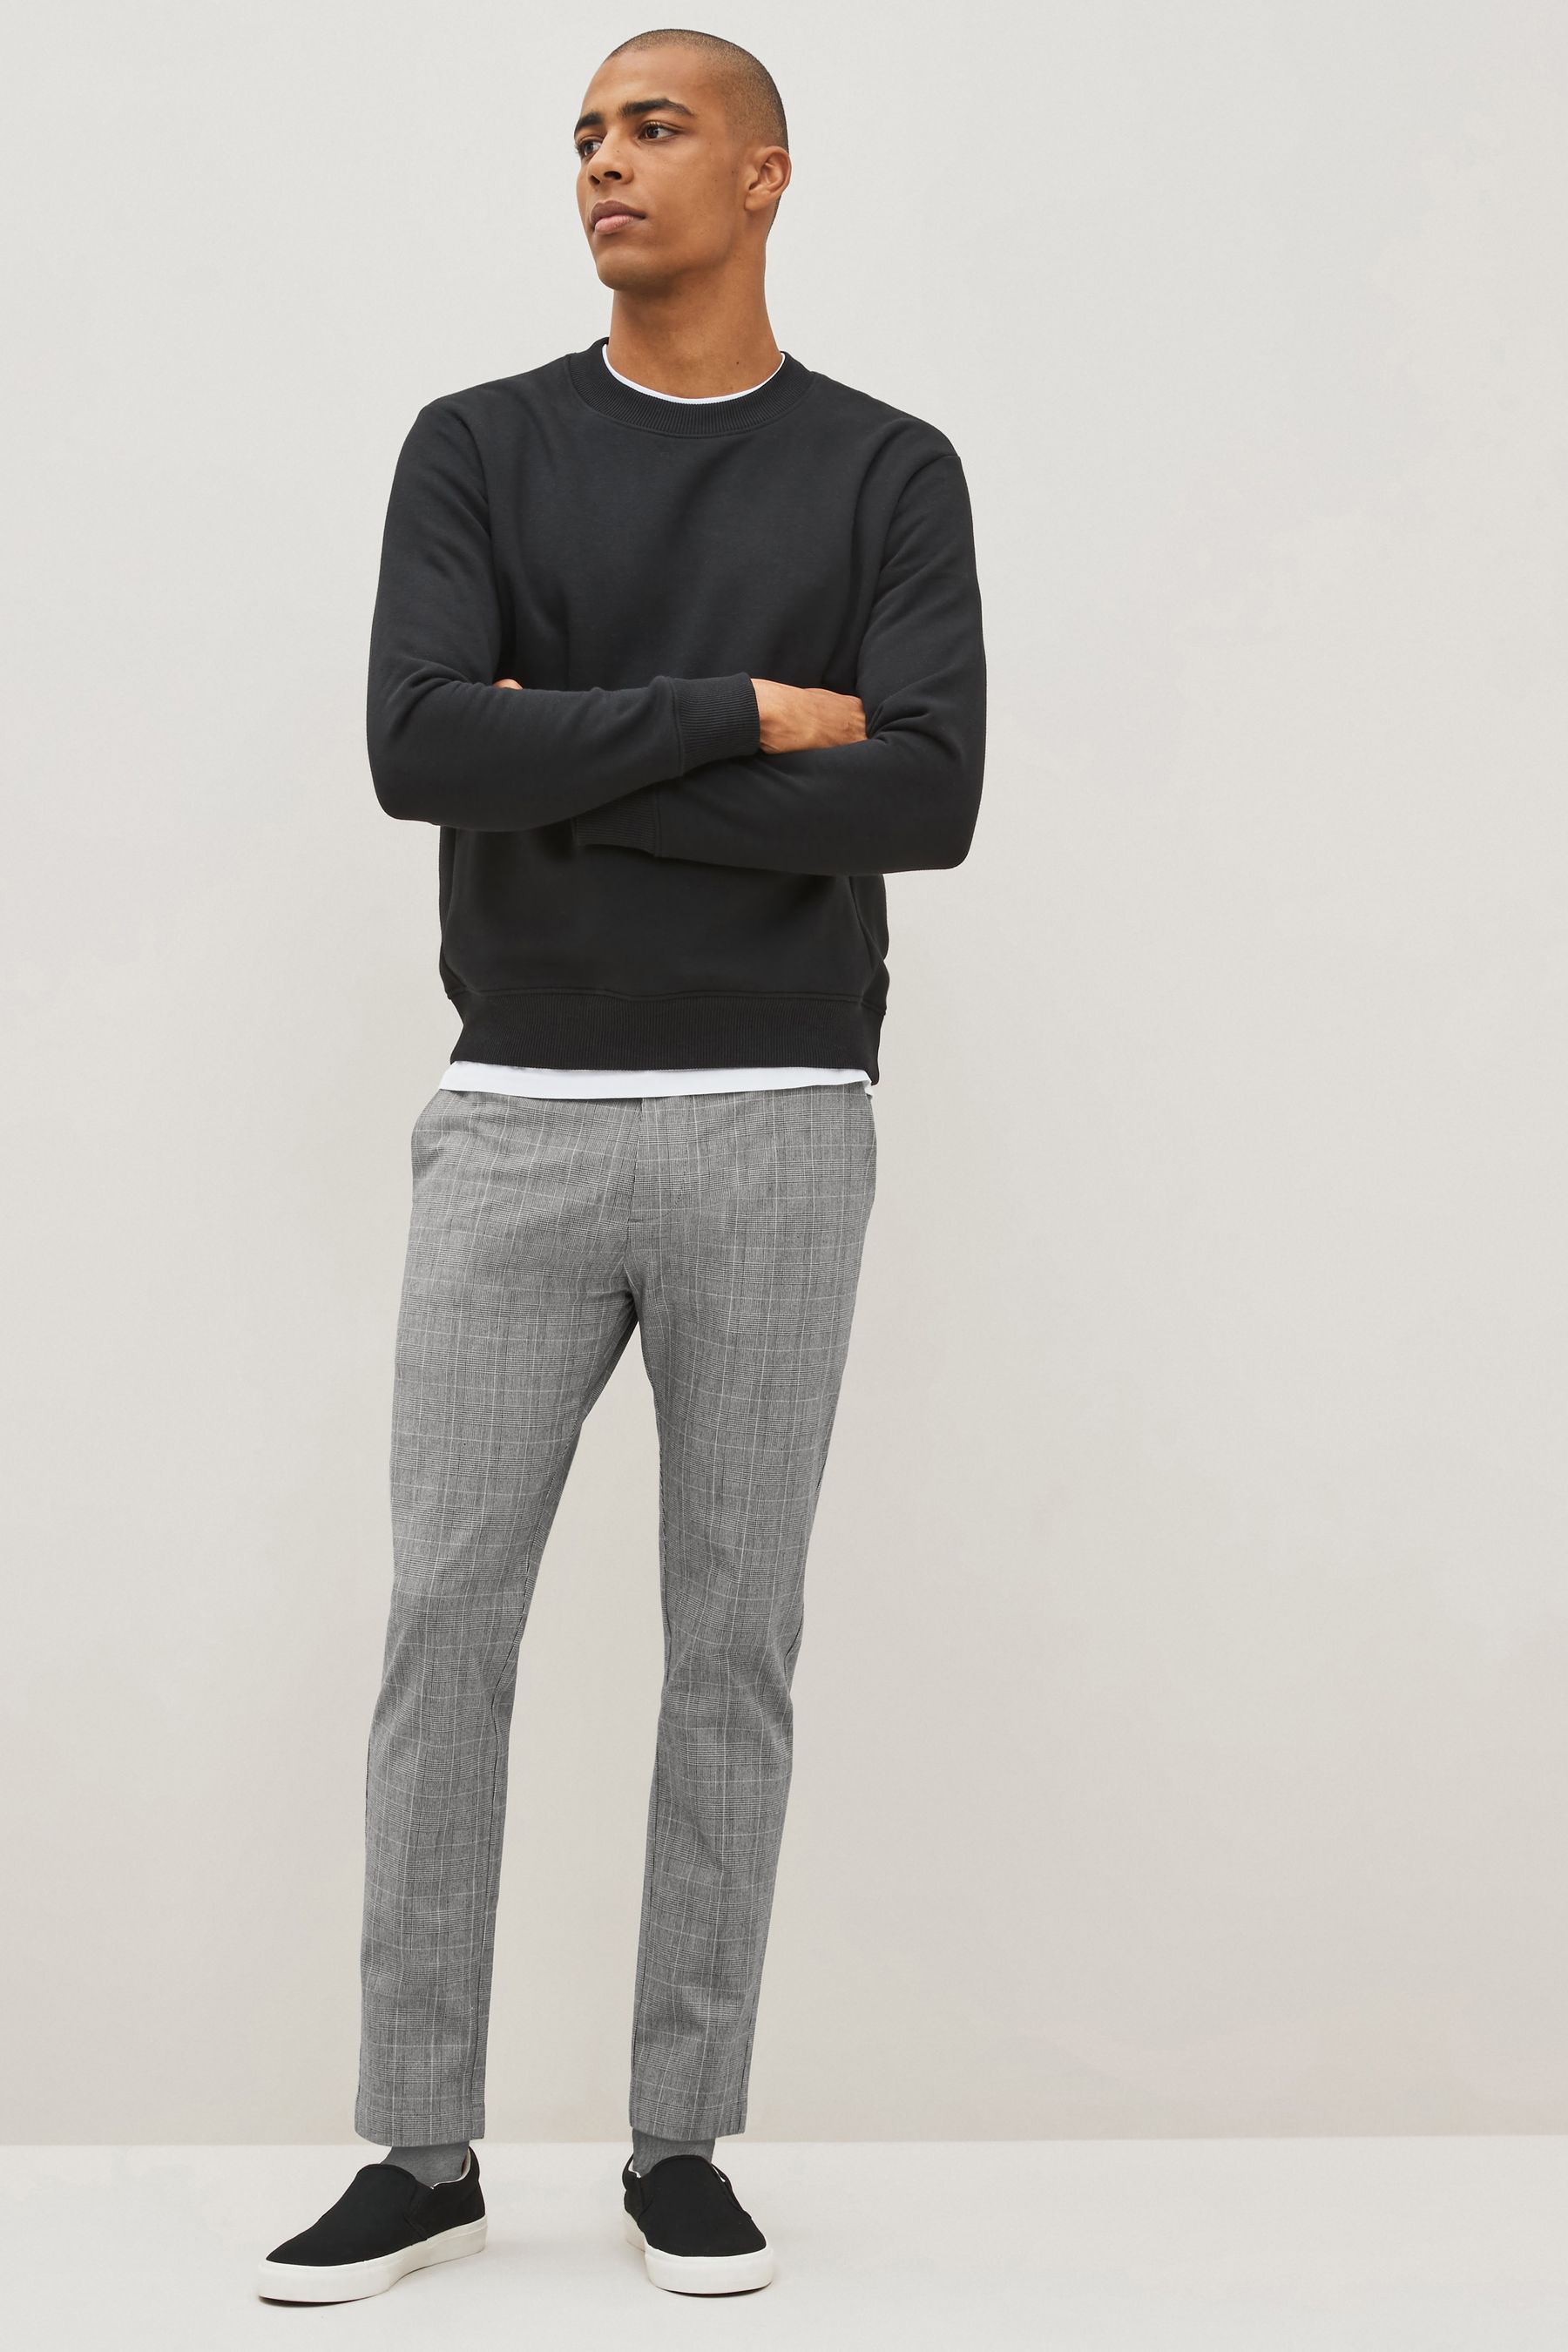 Buy Cotton Chino Trousers from Next Ireland